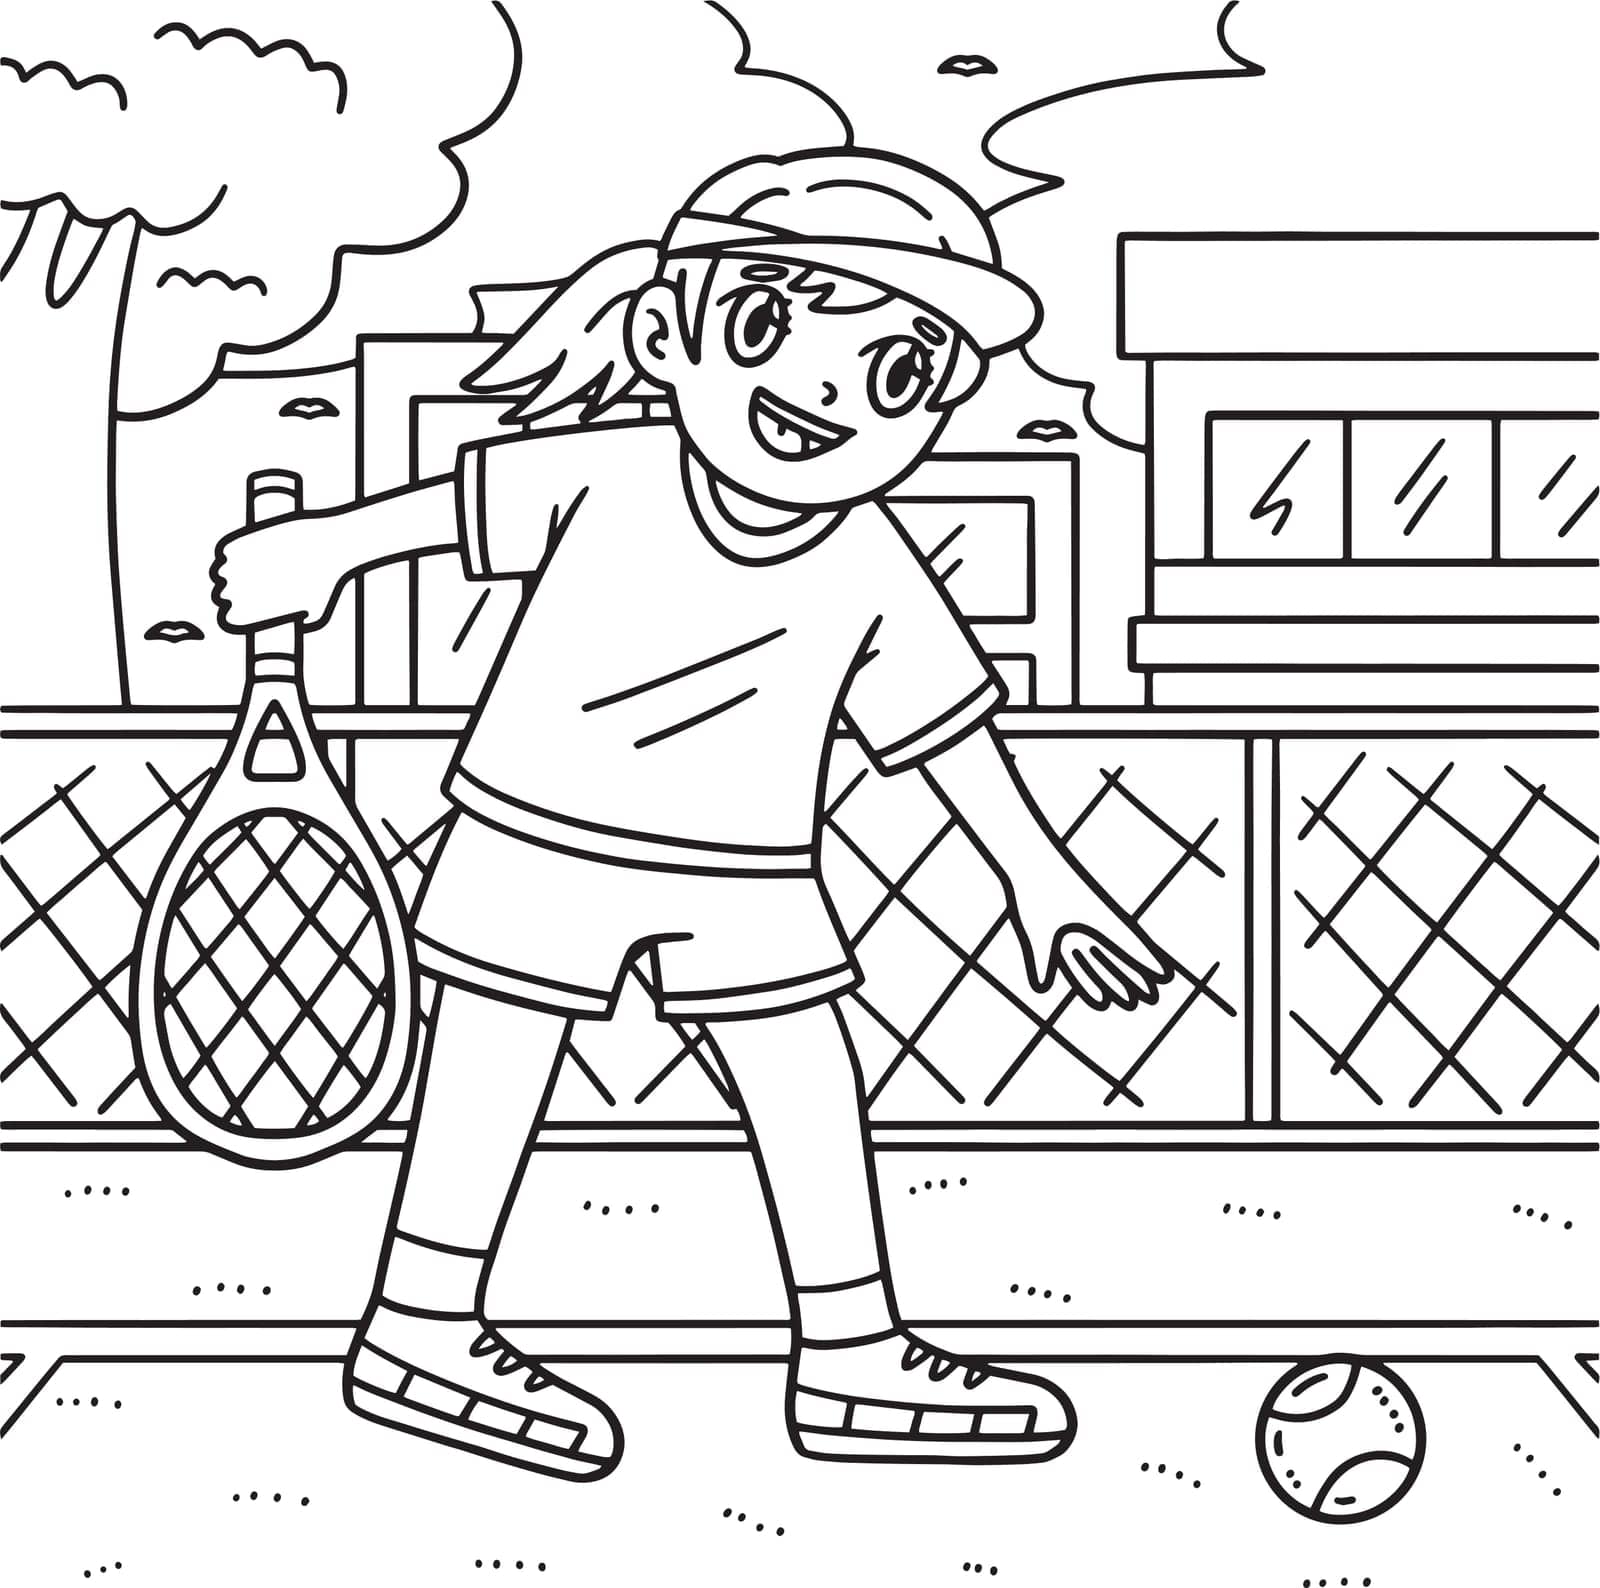 Tennis Female Player Picking a Ball Coloring Page by abbydesign